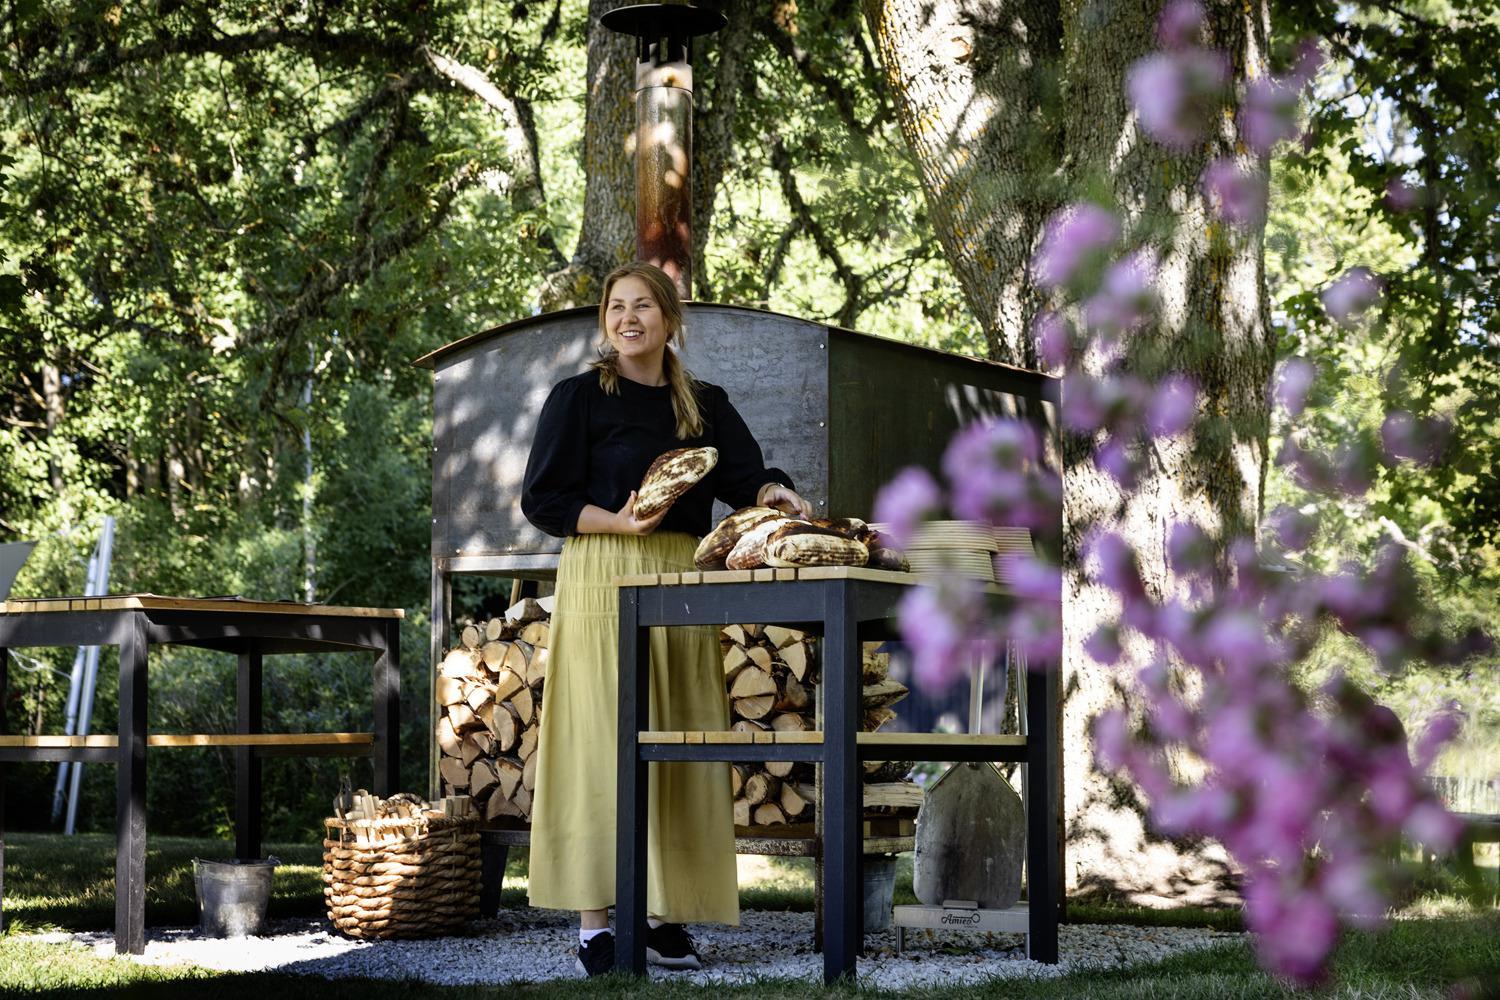 A woman is standing by a wood fired oven, holding bread, in a garden during summer.